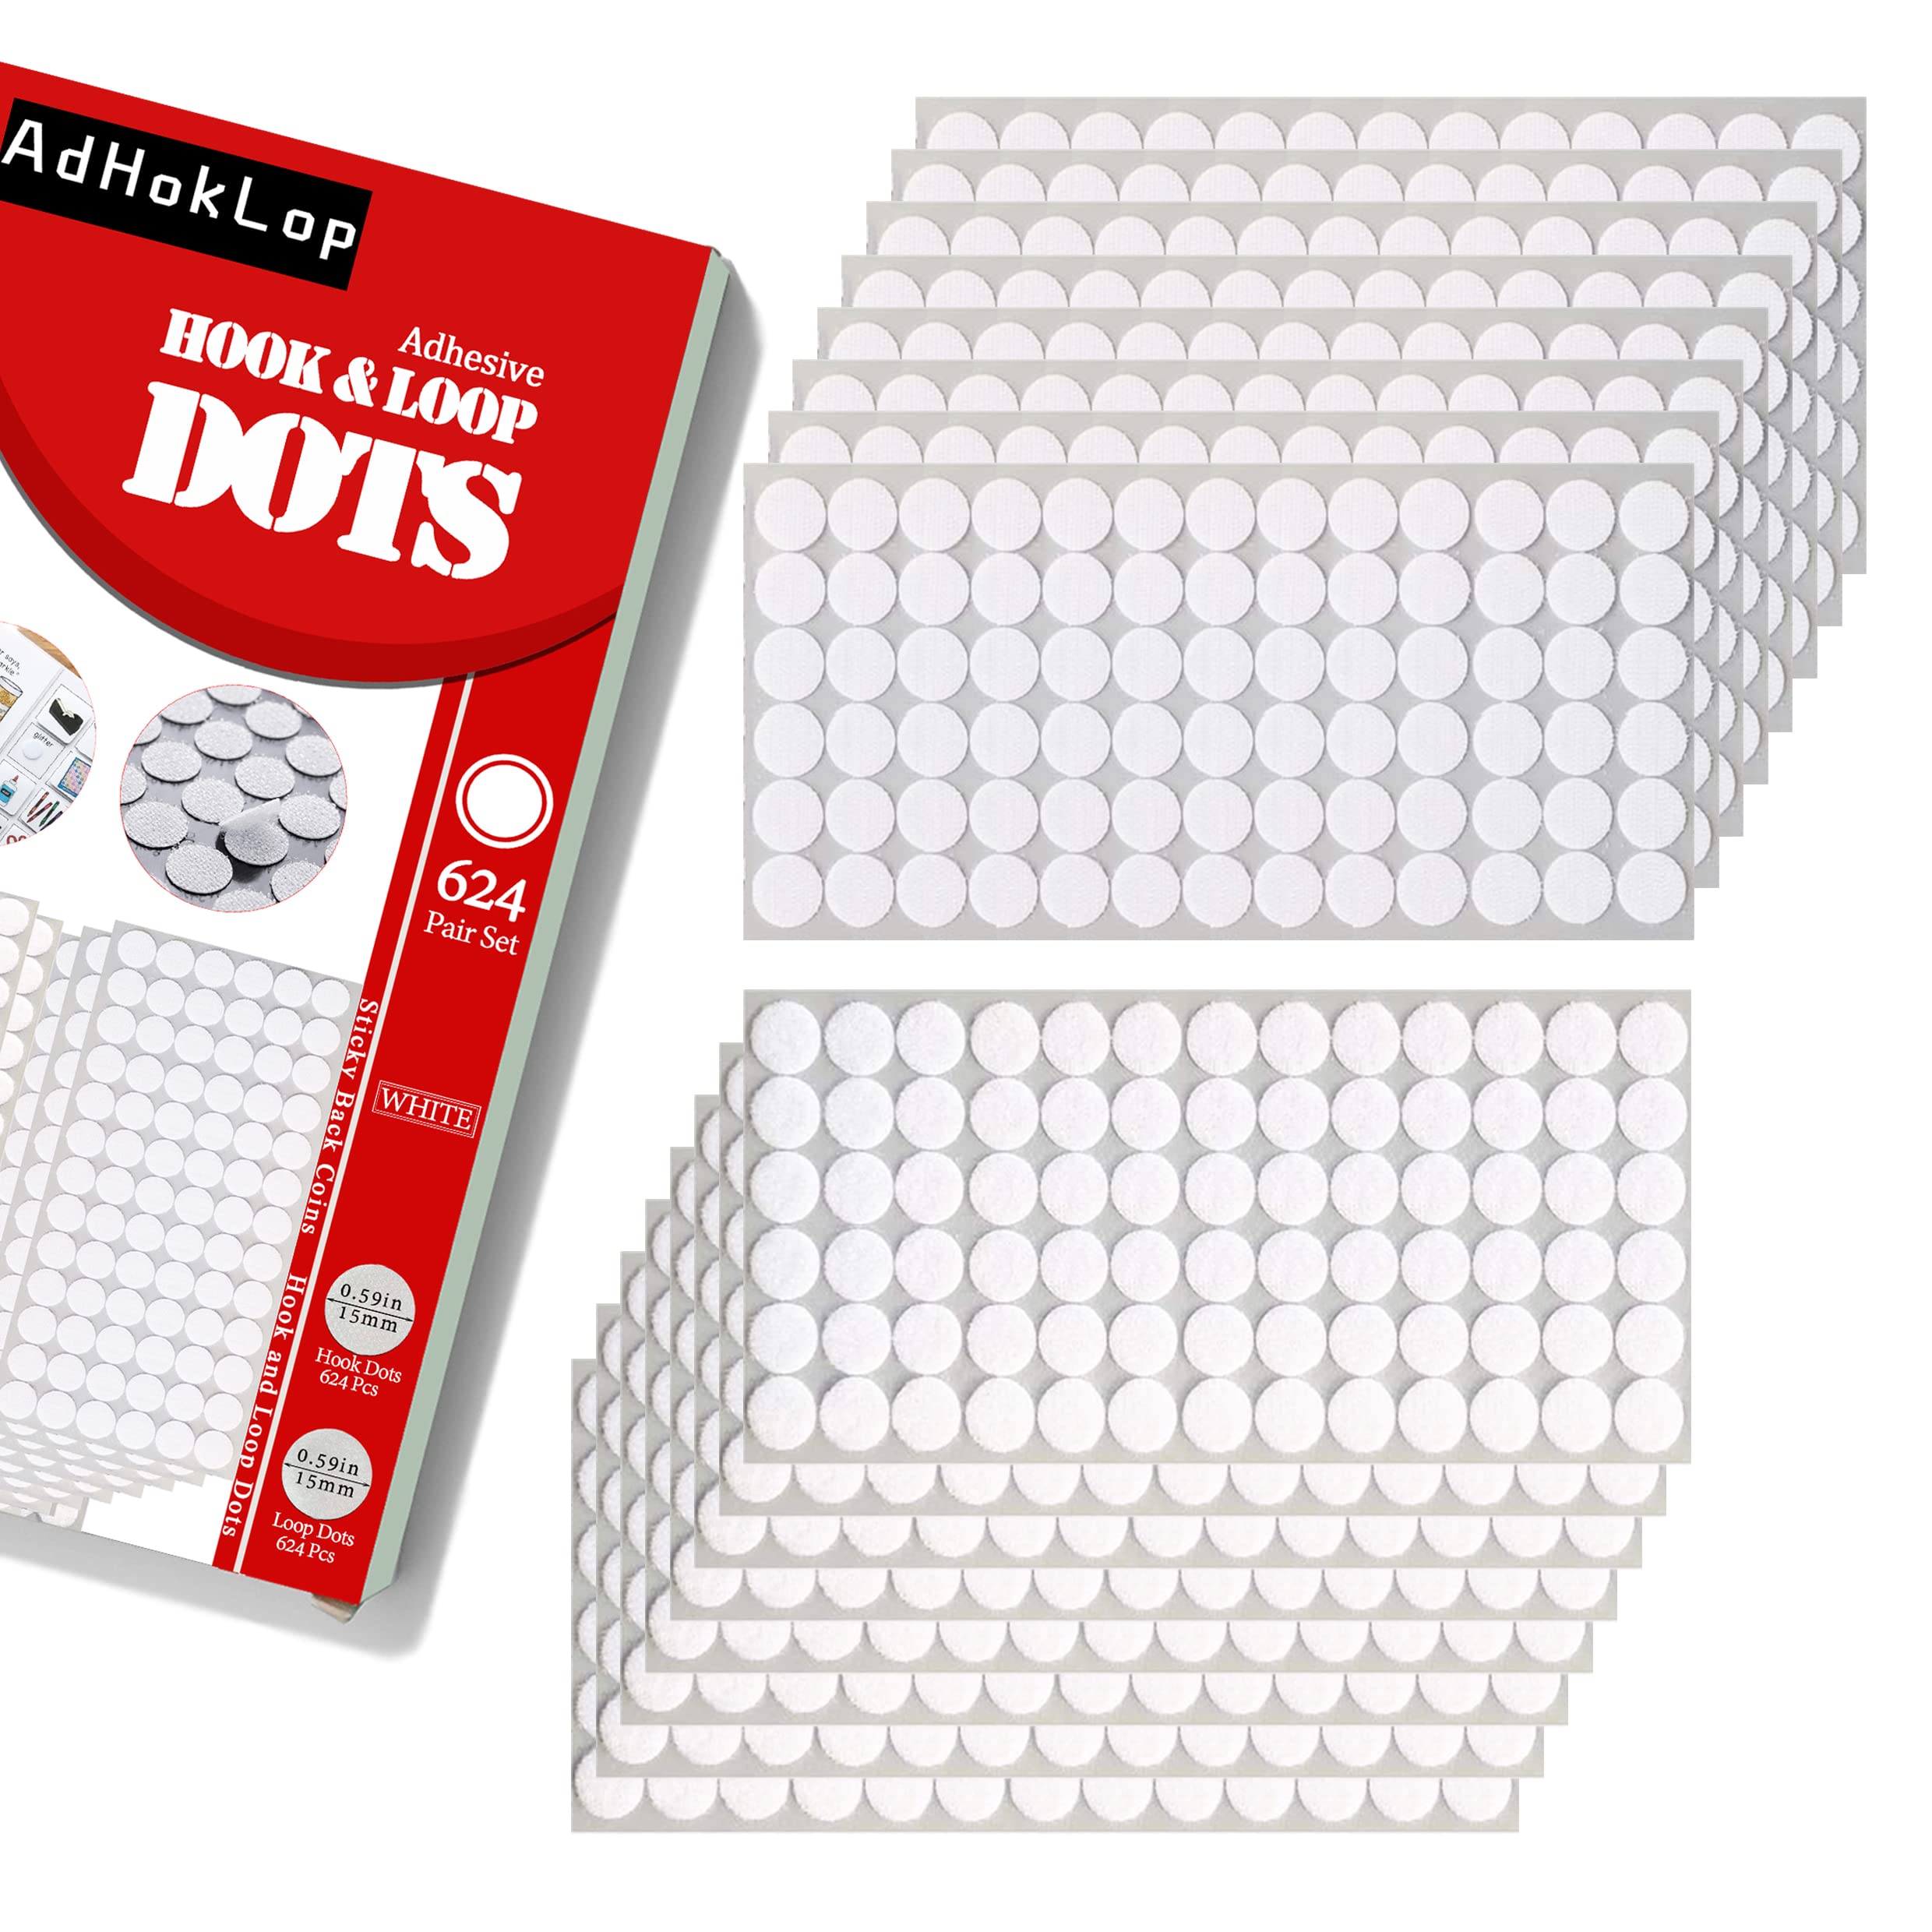 Self Adhesive Dots 1000Pcs(500 Pair Sets) 0.59 Inch Diameter Strong Self Adhesive  Dots for Classroom Nylon Sticky Back Coins Hook Loop Strips Small Circle  Dots Stickers Tapes White 0.59 -1000Pcs